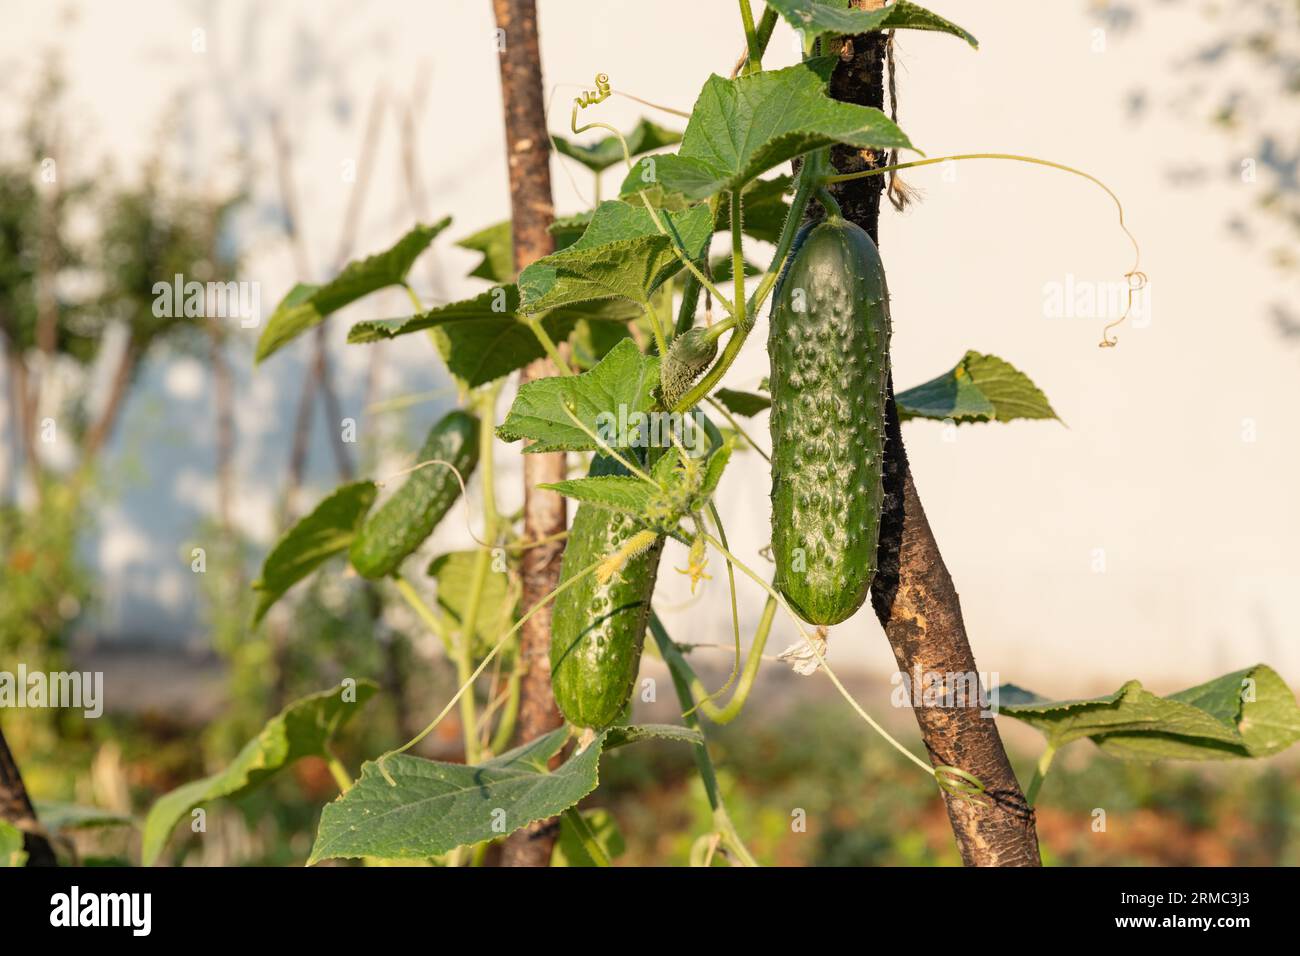 Cucumber harvest. Cucumbers grow on the farm. Leaves, flowers and fruits of cucumbers. Stock Photo